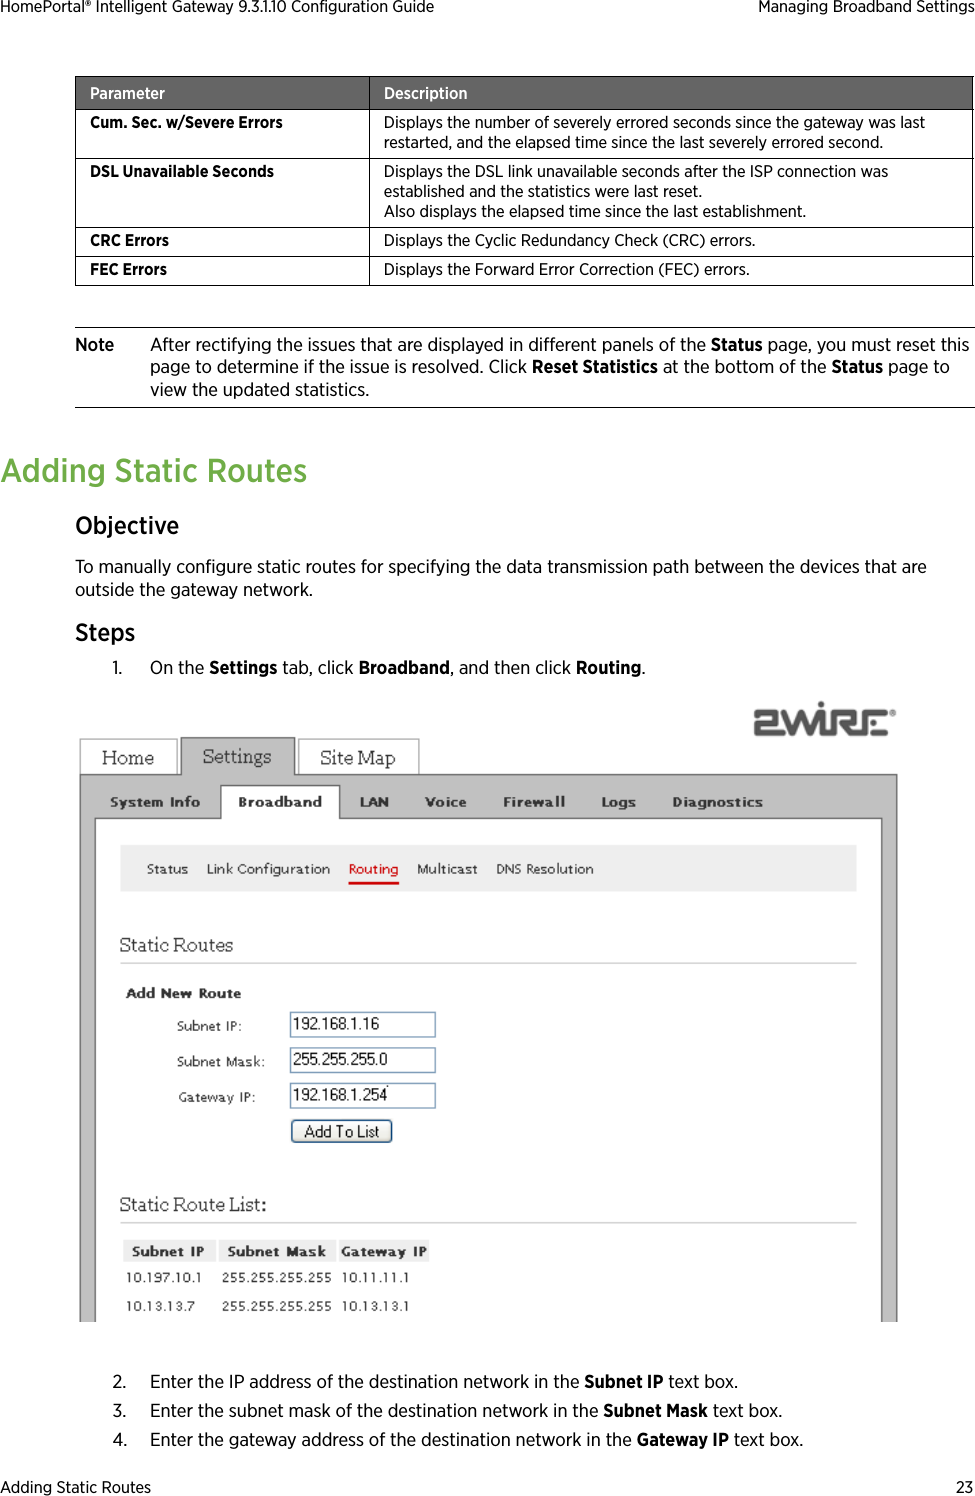 Adding Static Routes 23HomePortal® Intelligent Gateway 9.3.1.10 Configuration Guide Managing Broadband SettingsNote After rectifying the issues that are displayed in different panels of the Status page, you must reset this page to determine if the issue is resolved. Click Reset Statistics at the bottom of the Status page to view the updated statistics.Adding Static RoutesObjectiveTo manually configure static routes for specifying the data transmission path between the devices that are outside the gateway network.Steps1. On the Settings tab, click Broadband, and then click Routing.2. Enter the IP address of the destination network in the Subnet IP text box.3. Enter the subnet mask of the destination network in the Subnet Mask text box.4. Enter the gateway address of the destination network in the Gateway IP text box.Cum. Sec. w/Severe Errors Displays the number of severely errored seconds since the gateway was last restarted, and the elapsed time since the last severely errored second.DSL Unavailable Seconds Displays the DSL link unavailable seconds after the ISP connection was established and the statistics were last reset. Also displays the elapsed time since the last establishment.CRC Errors Displays the Cyclic Redundancy Check (CRC) errors.FEC Errors Displays the Forward Error Correction (FEC) errors.Parameter Description